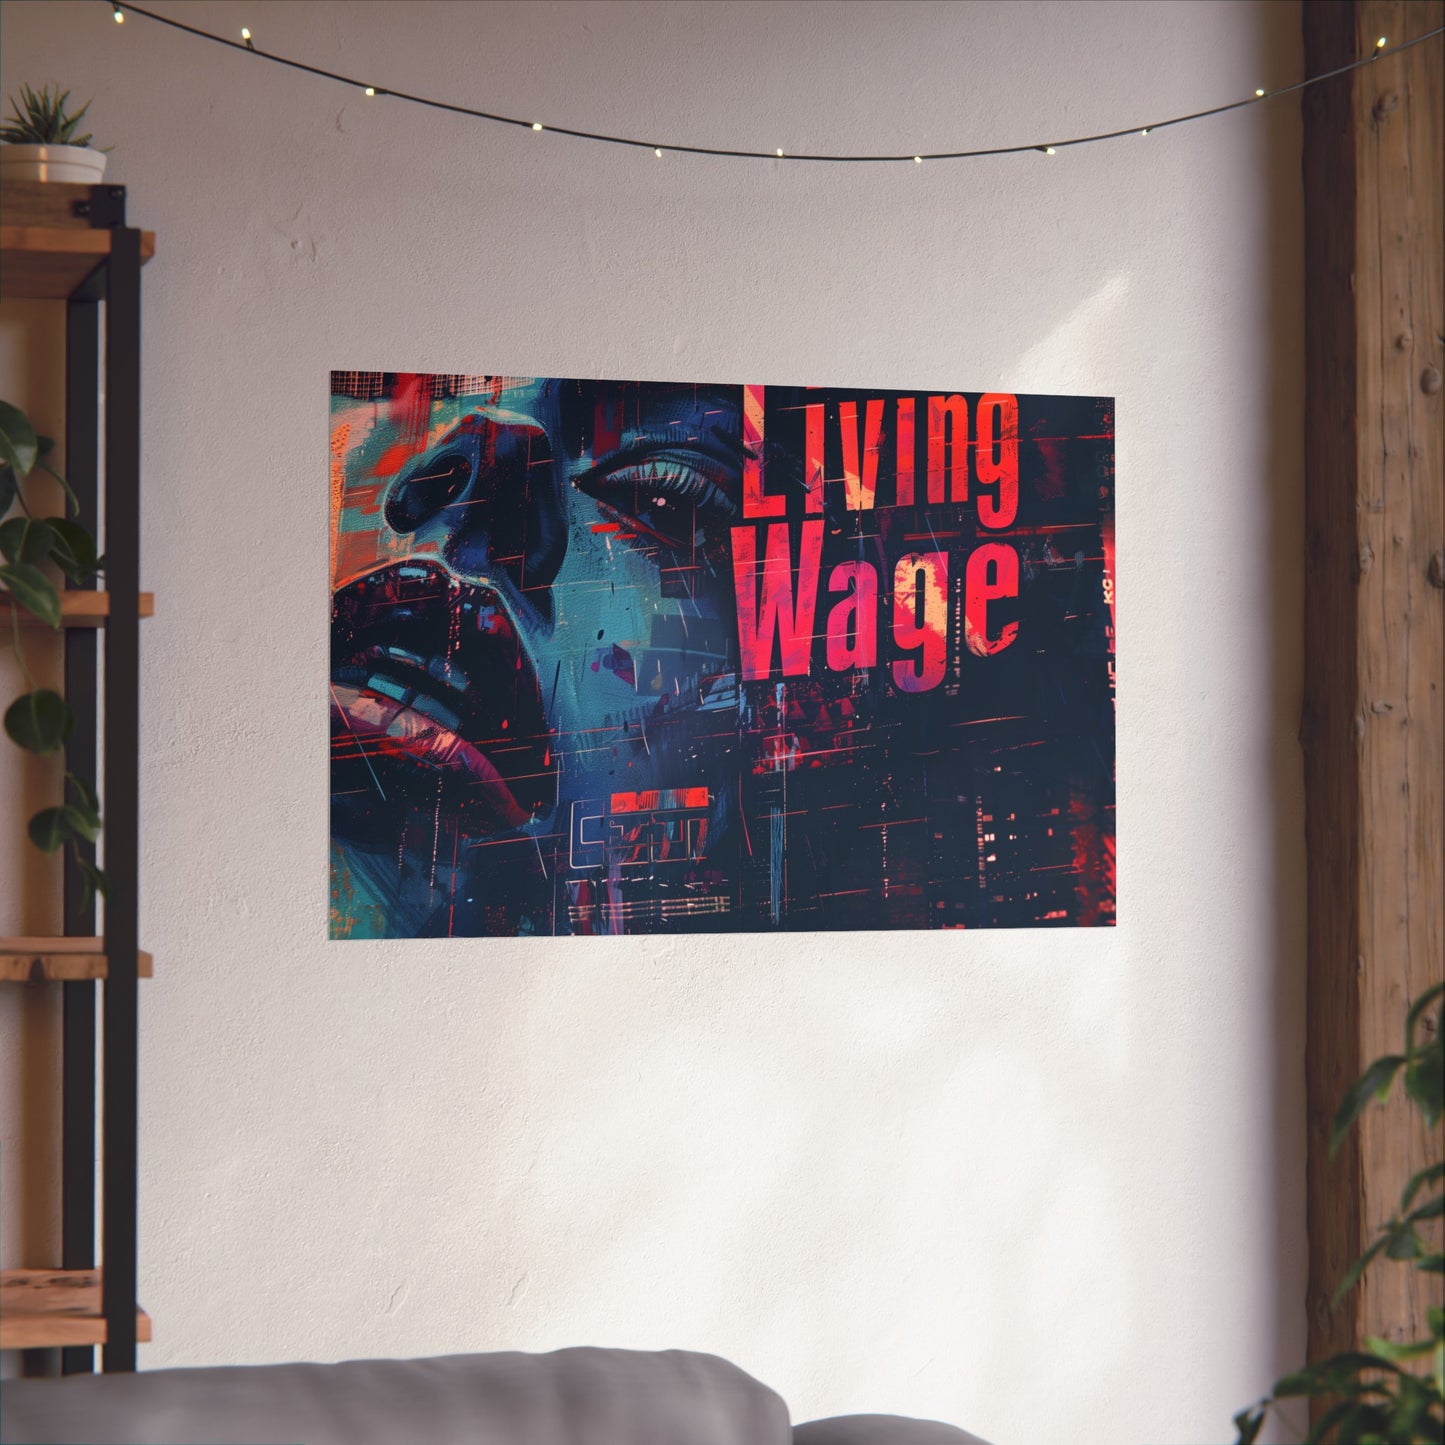 Living Wage! Demand Respect! Gorgeous Poster Cyberpunk Style Activist Art Piece Cool and Engaging! Worker Labor Union Rights!